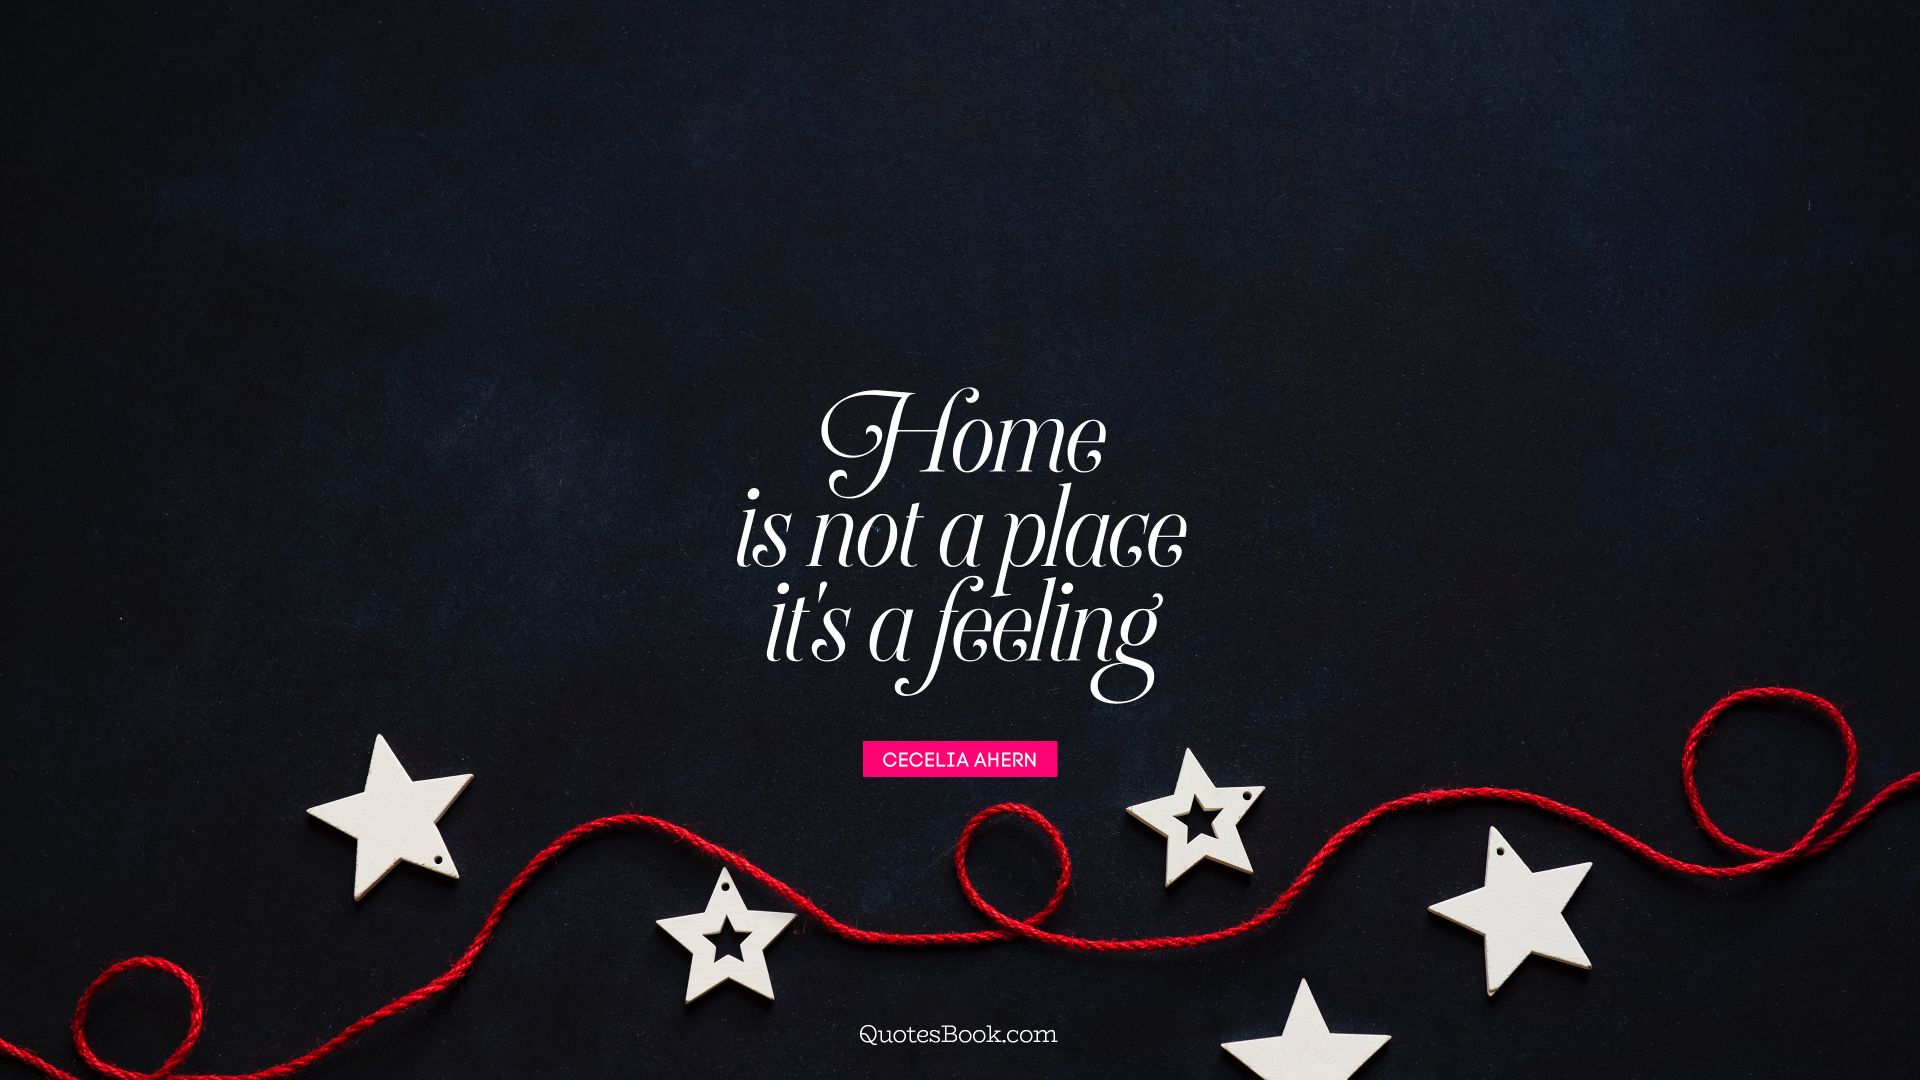 Home is not a place it's a feeling. - Quote by Cecelia Ahern